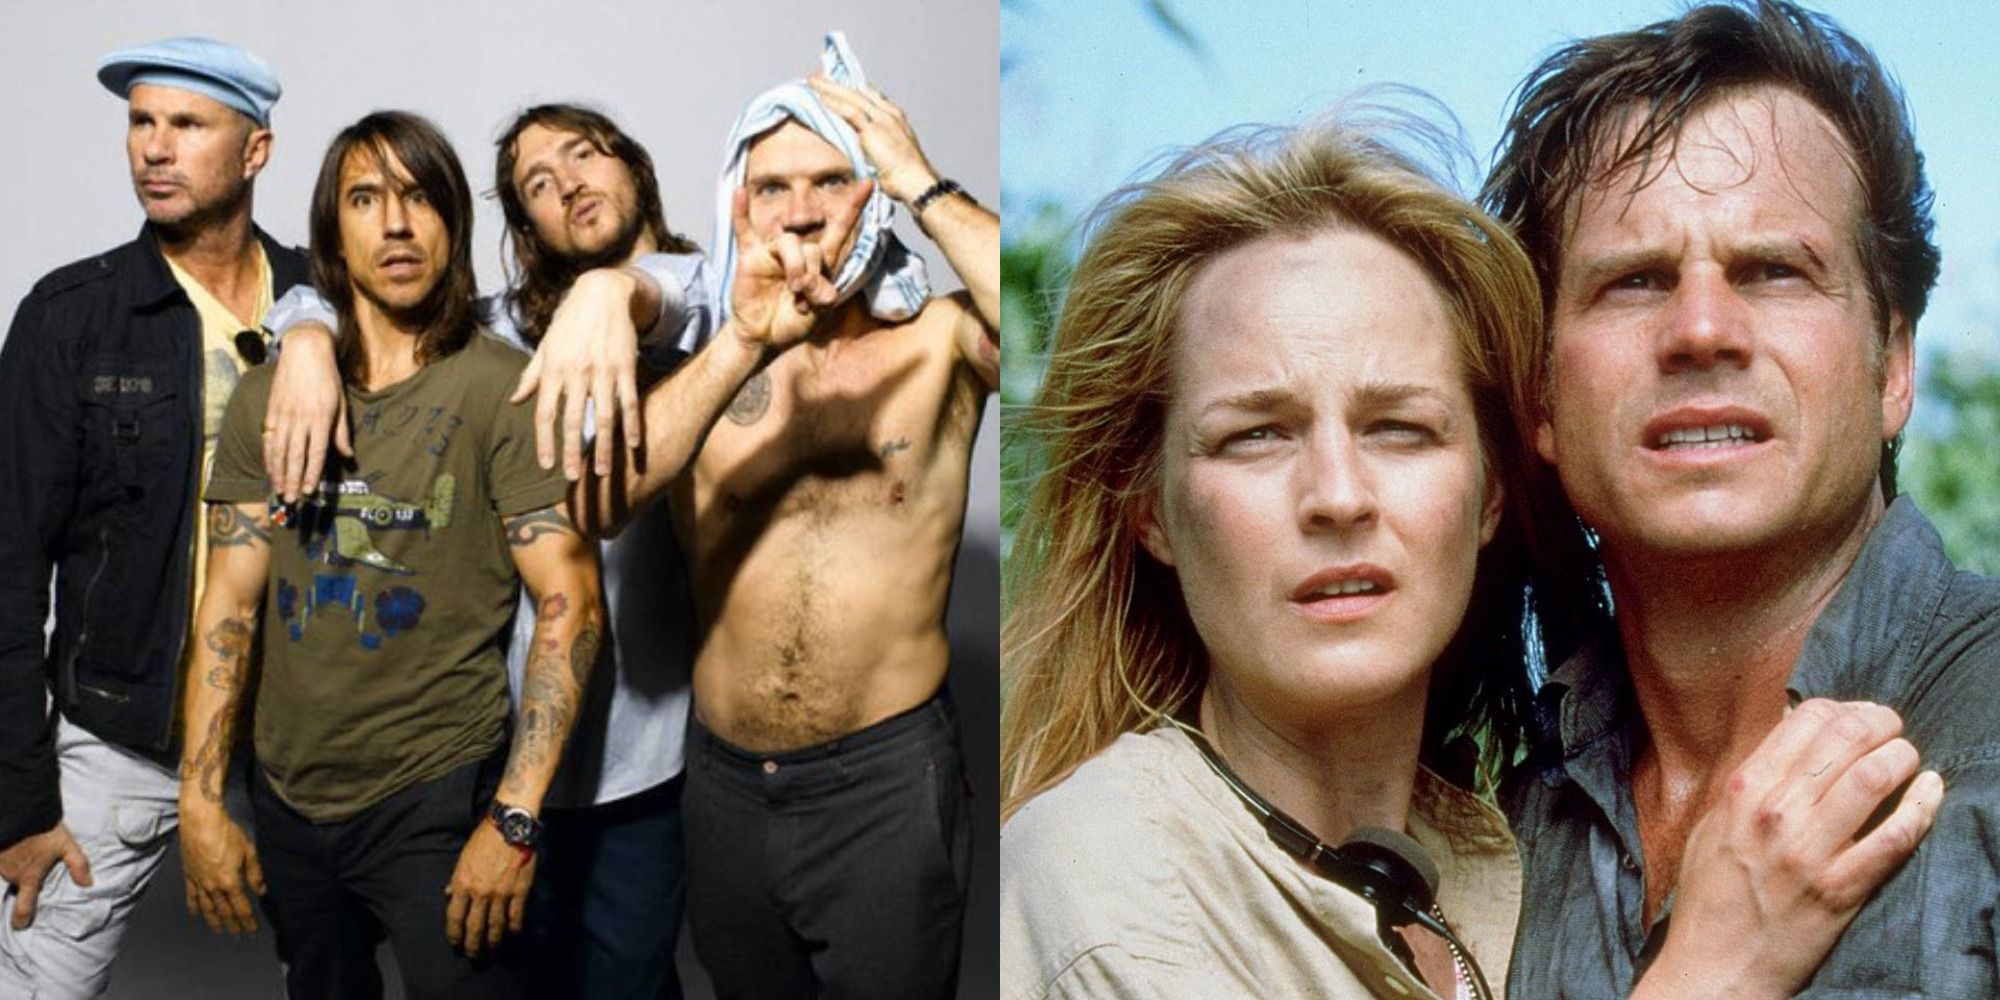 The 10 Best Uses Of Red Hot Chili Peppers Songs In Movies